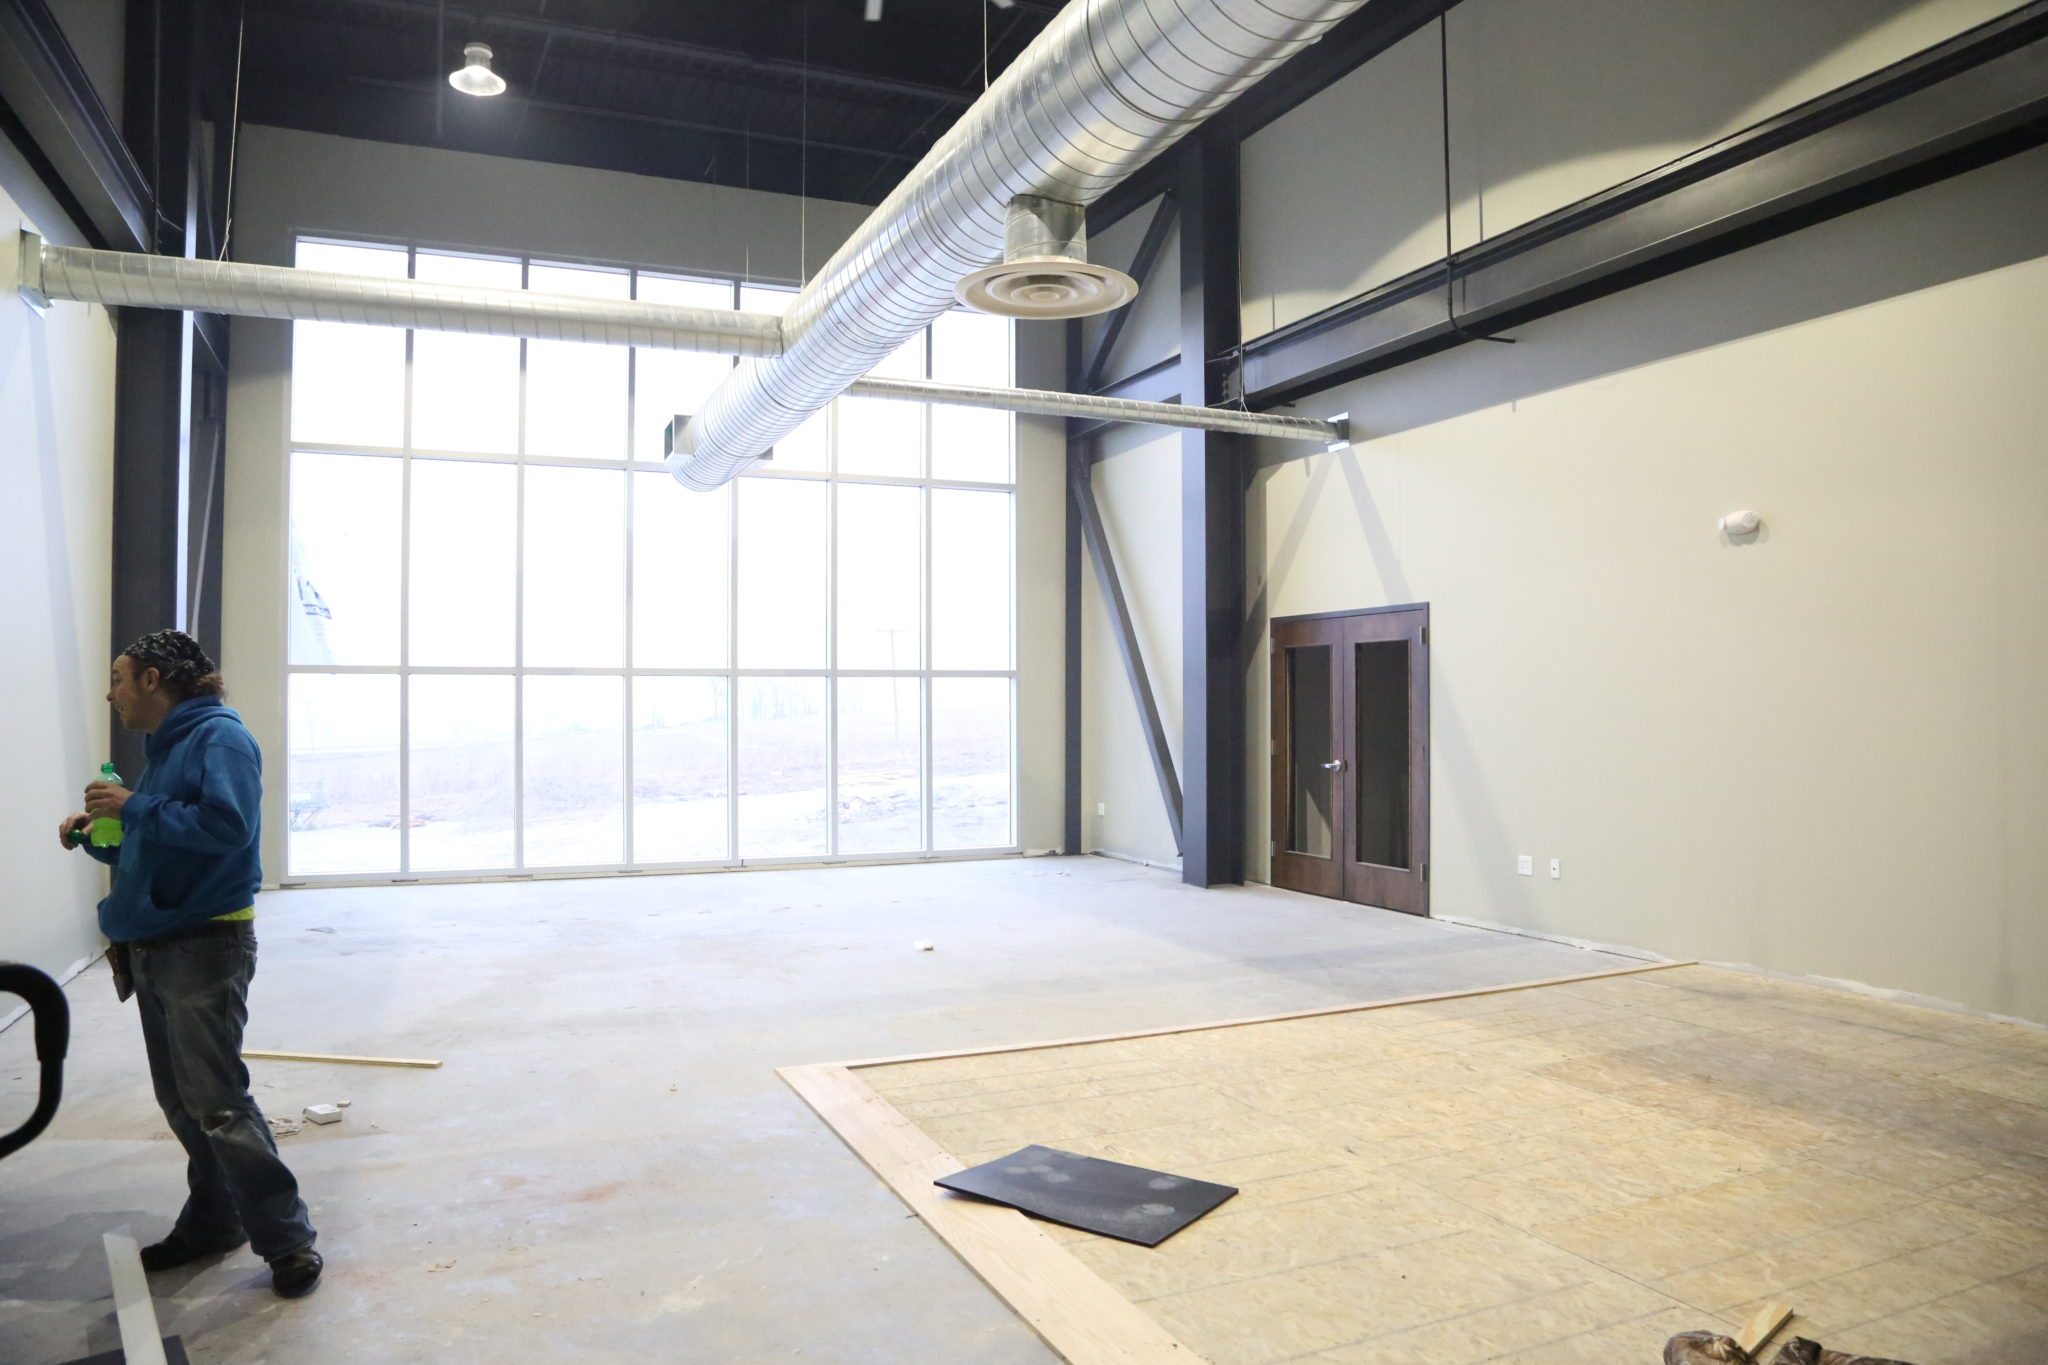 The main space in the gym, with floor to ceiling windows.